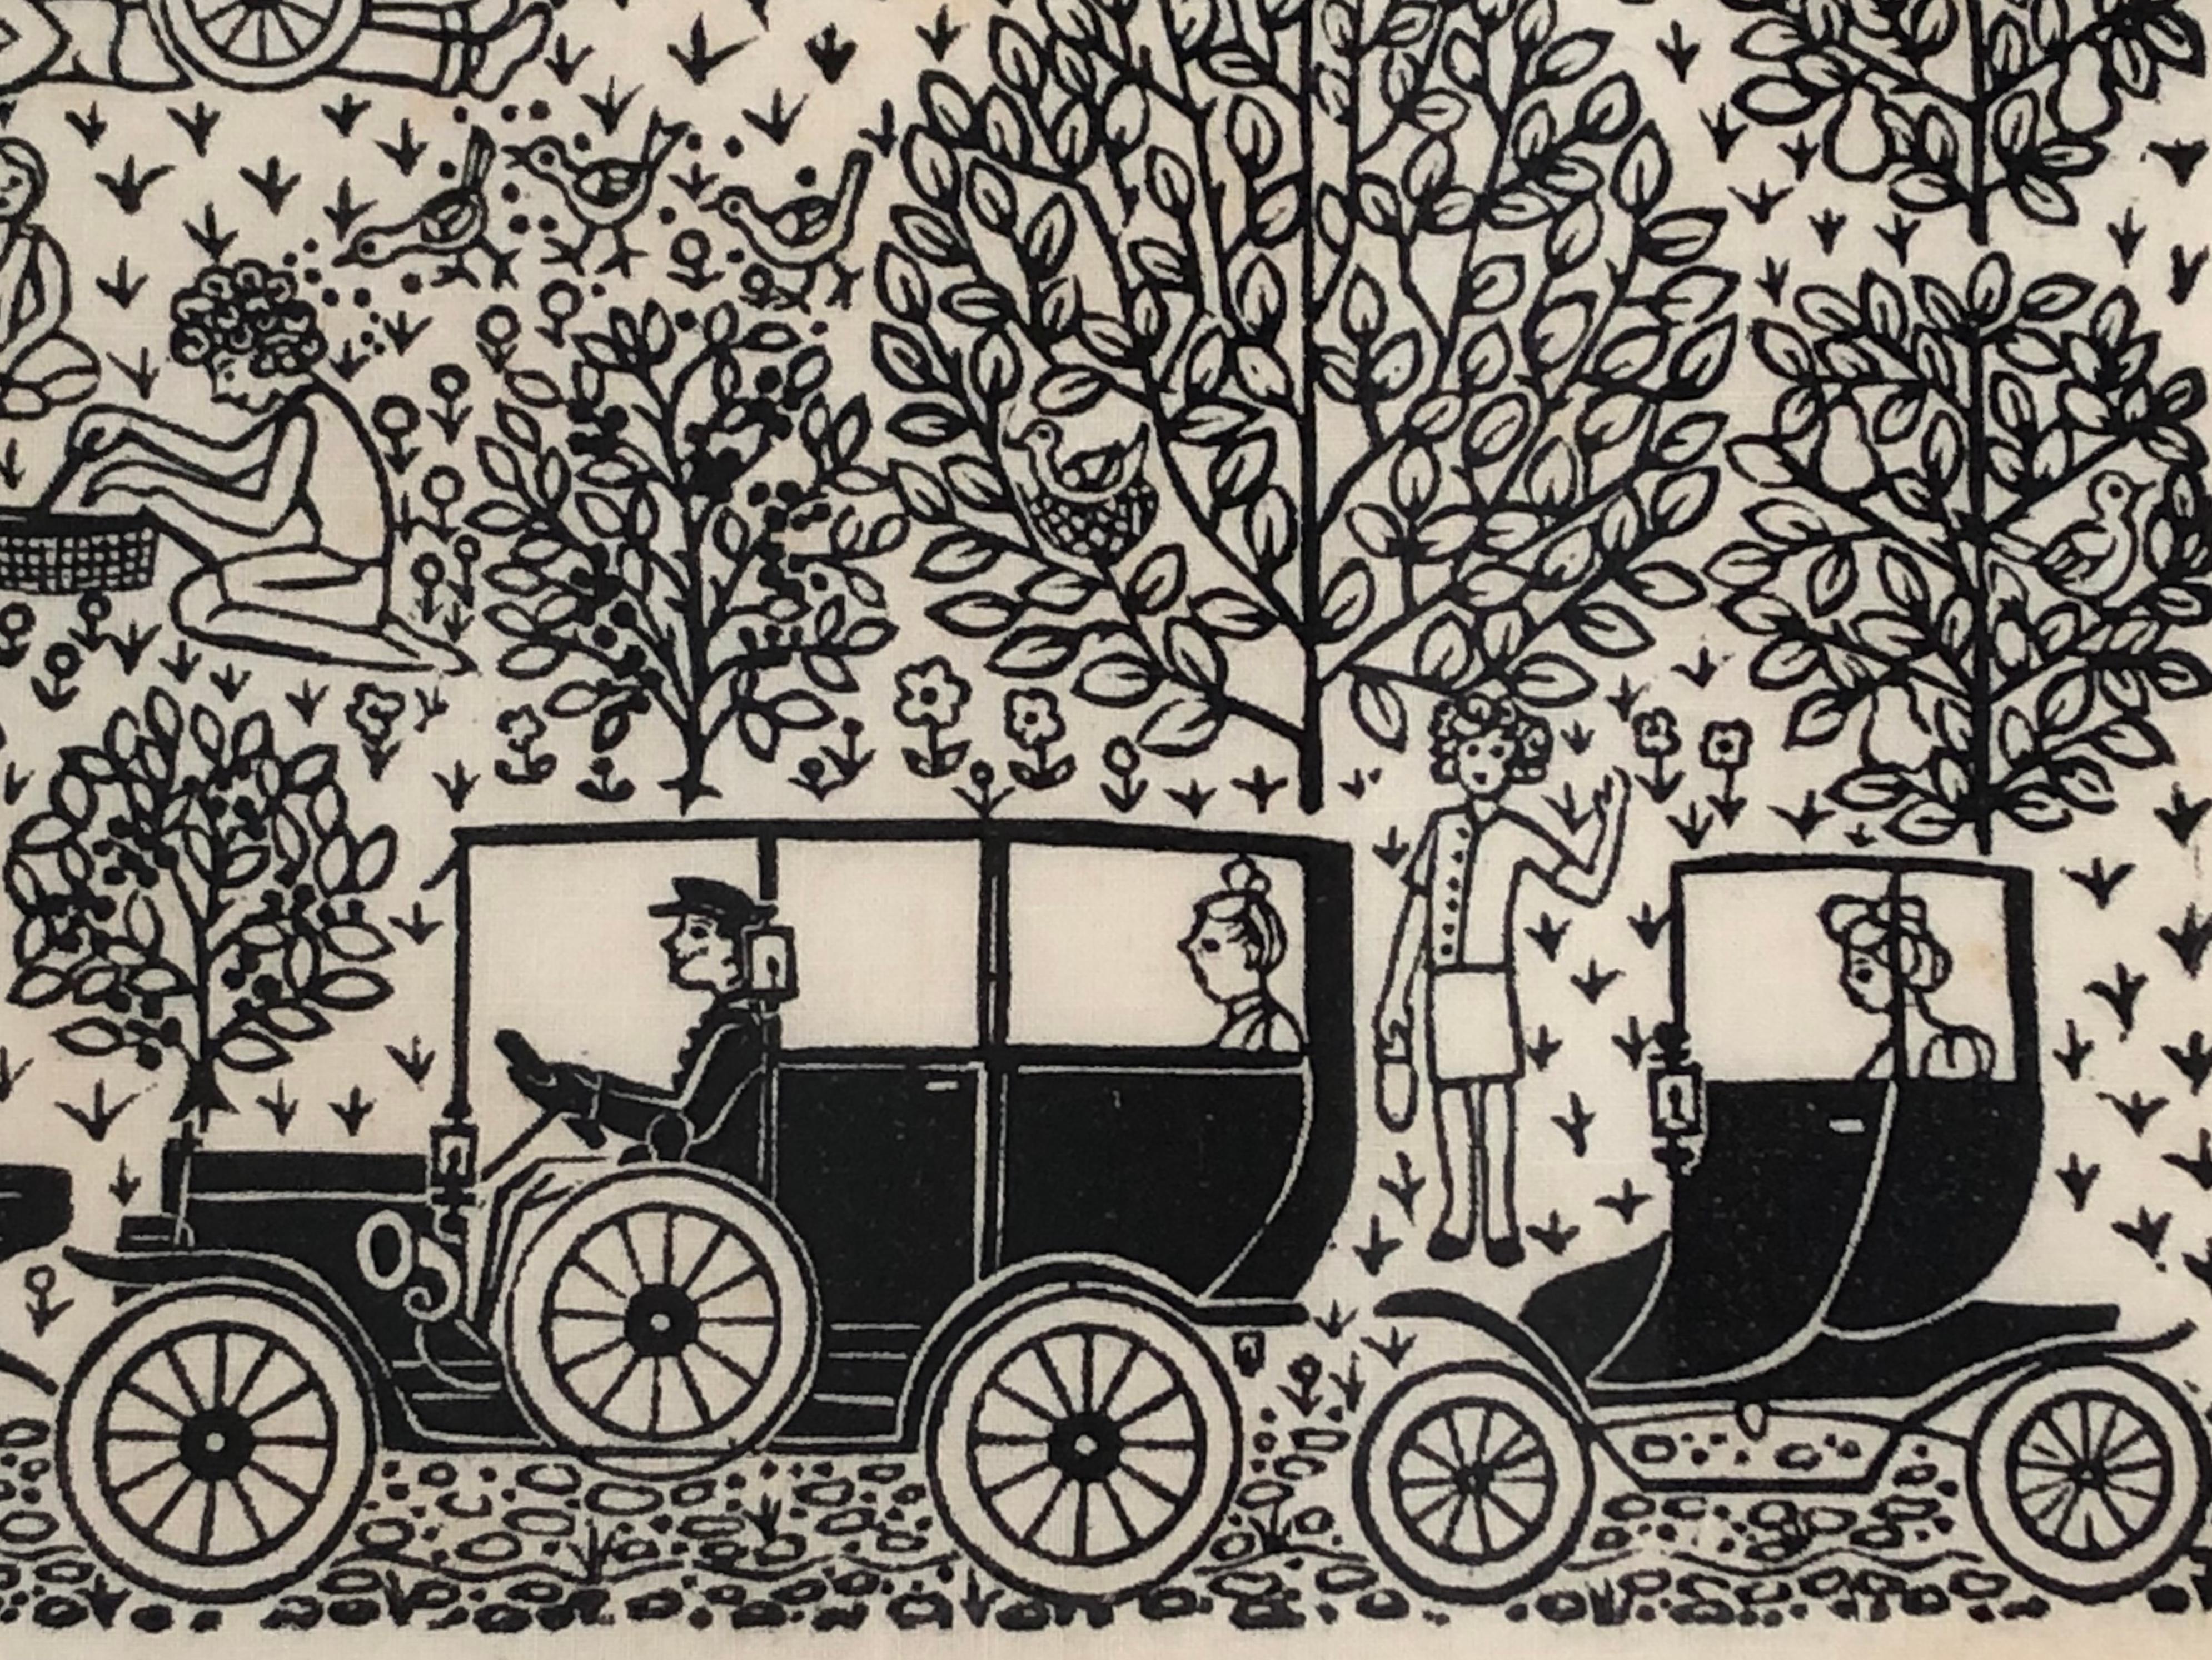 Folly Cove Designers Hand Block Printed Textile with Antique Automobiles 3